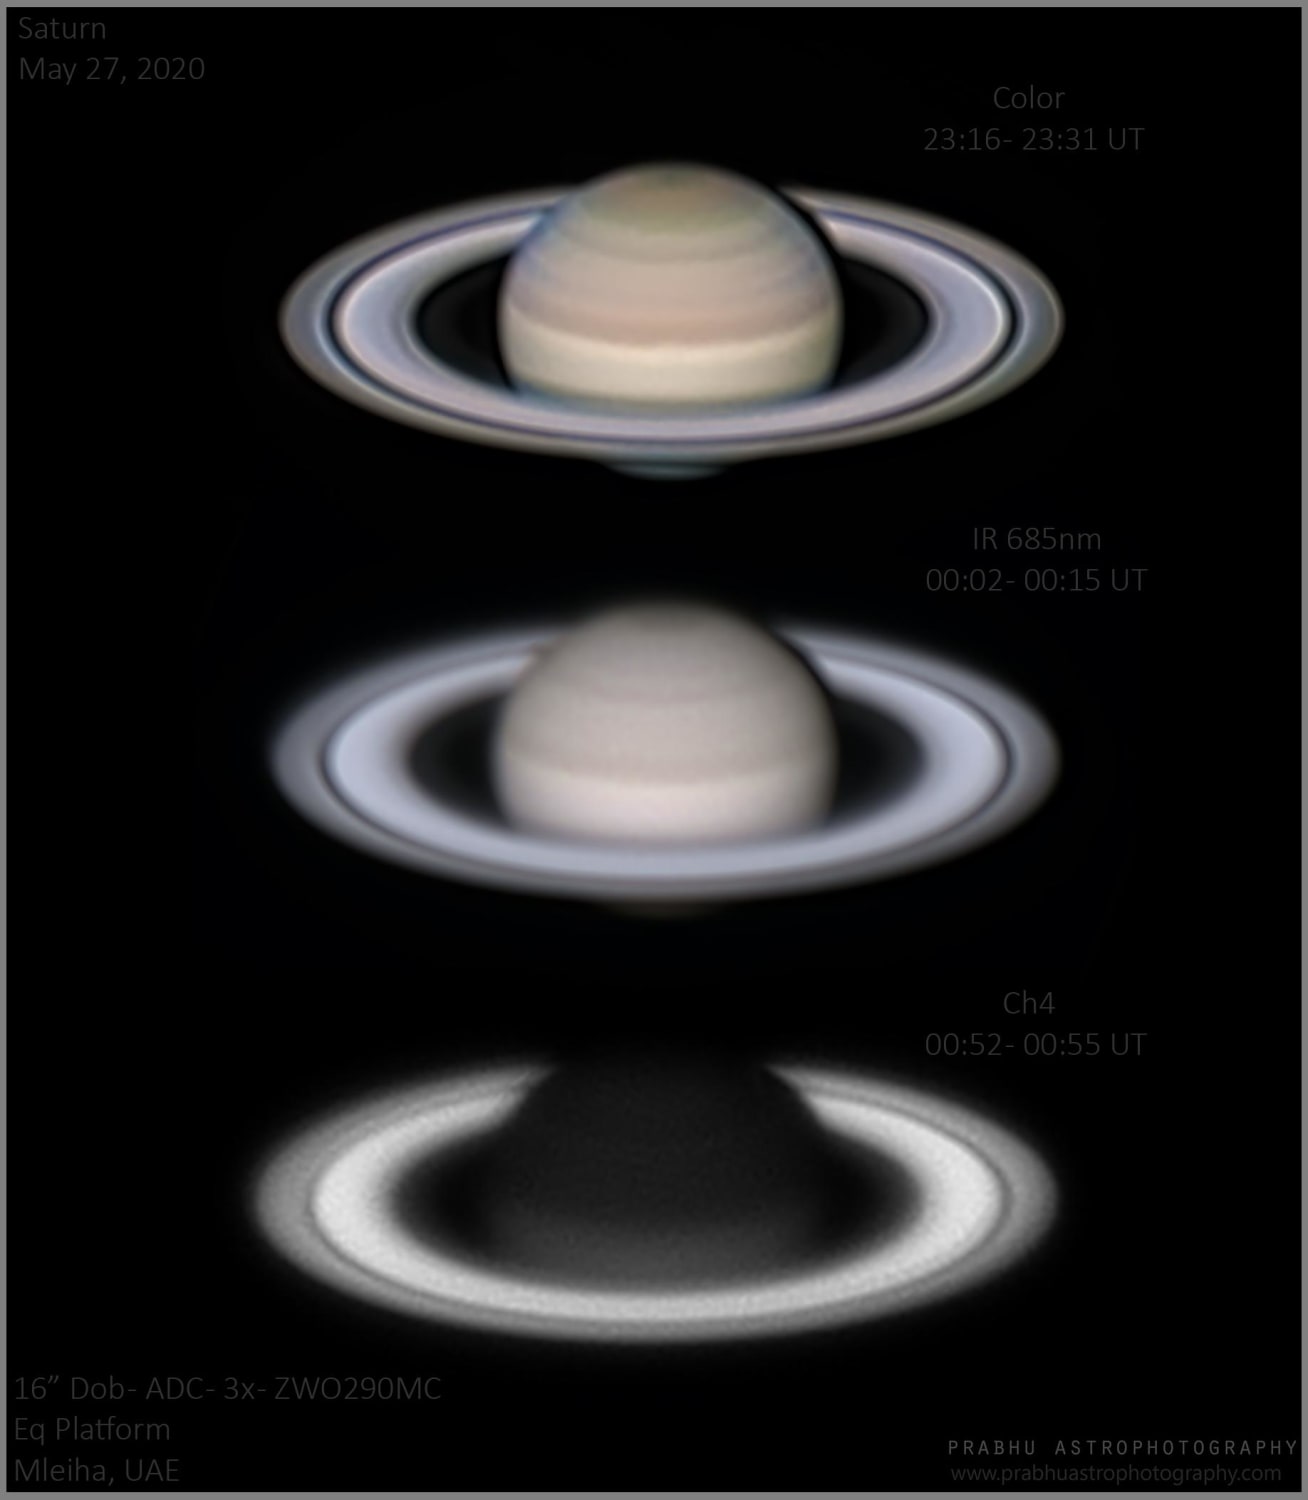 Saturn from May 27th, 2020